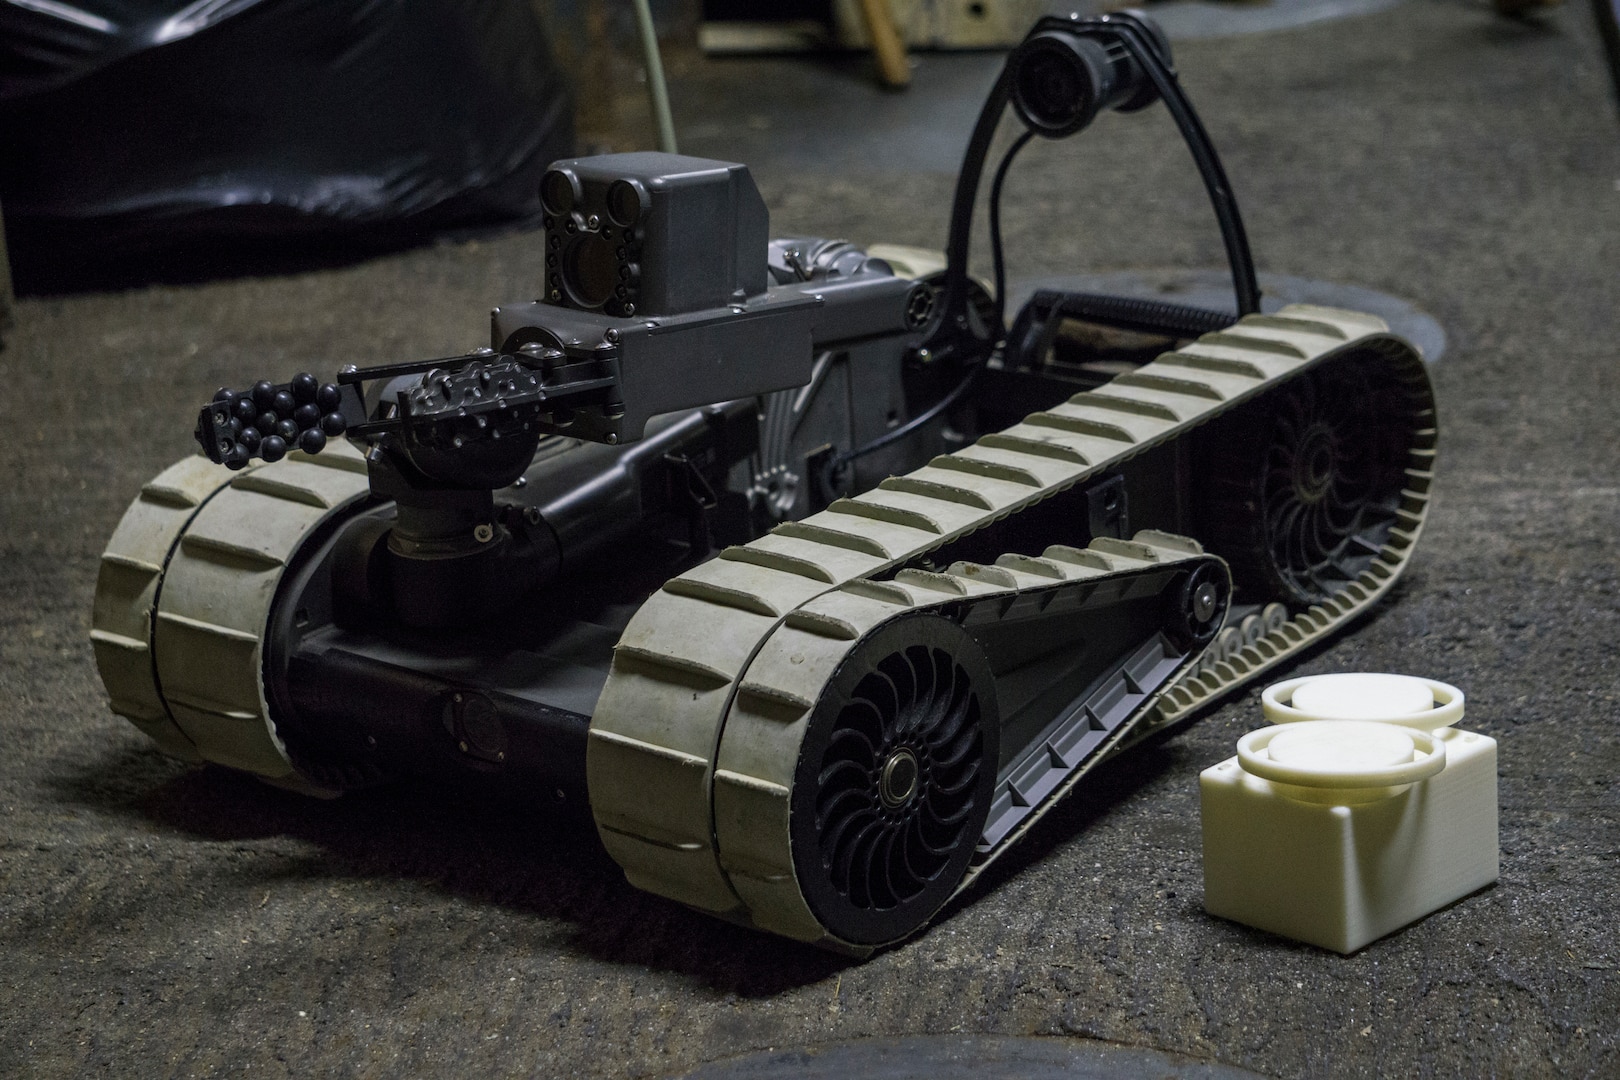 An iRobot 310 Small Unmanned Ground Vehicle belonging to Combat Logistic Battalion 31, 31st Marine Expeditionary Unit, sits staged with 3-D printed lens covers aboard the USS Wasp while underway in the Pacific Ocean, April 17, 2018. Marines with CLB-31 are now capable of ‘additive manufacturing,’ also known as 3-D printing, which is the technique of replicating digital 3-D models as tangible objects.  The 31st Marine Expeditionary Unit partners with the Navy’s Amphibious Squadron 11 to form the Wasp Amphibious Ready Group, a cohesive blue-green team capable of accomplishing a variety of missions across the Indo-Pacific.